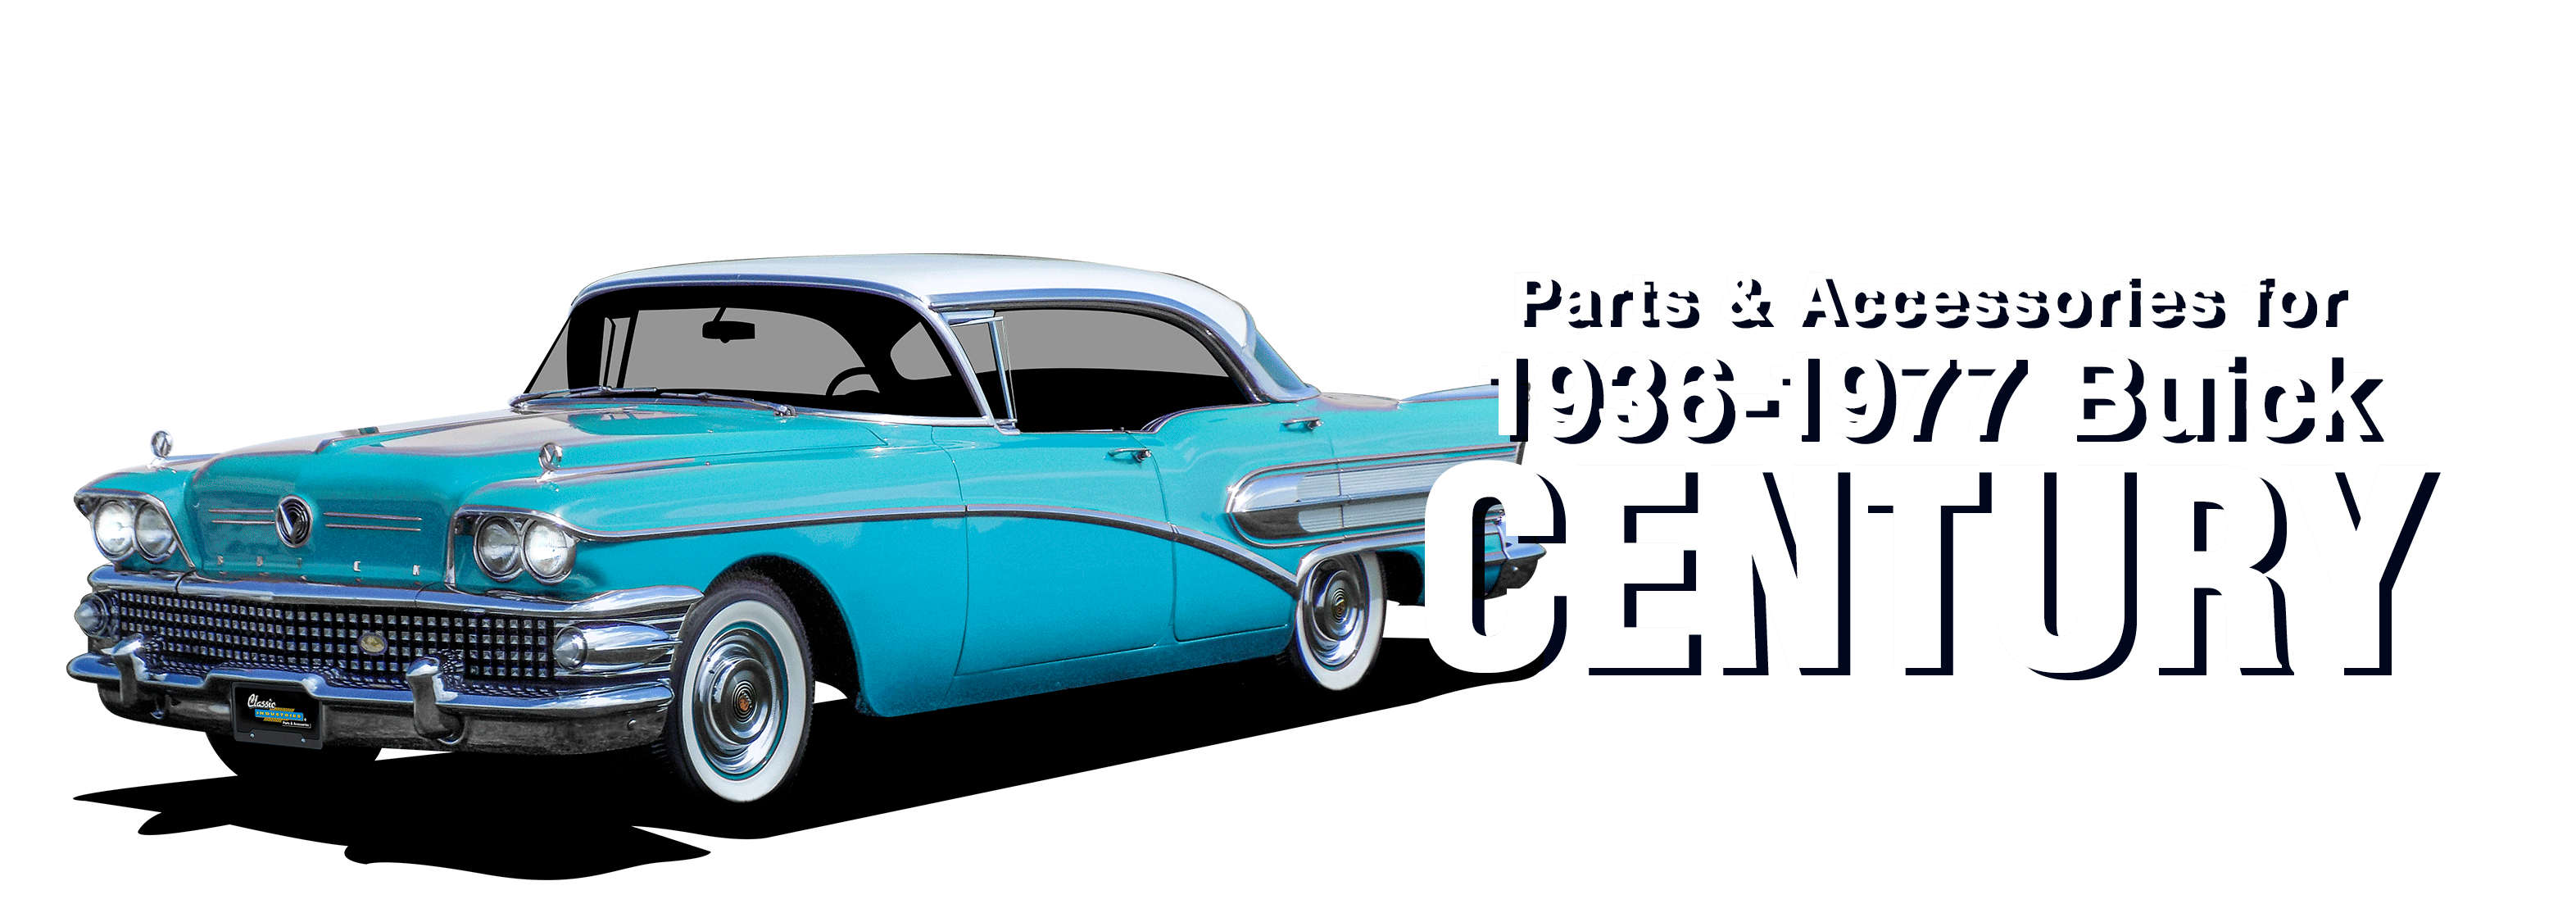 Parts & Accessories for 1936-1977 Buick Century